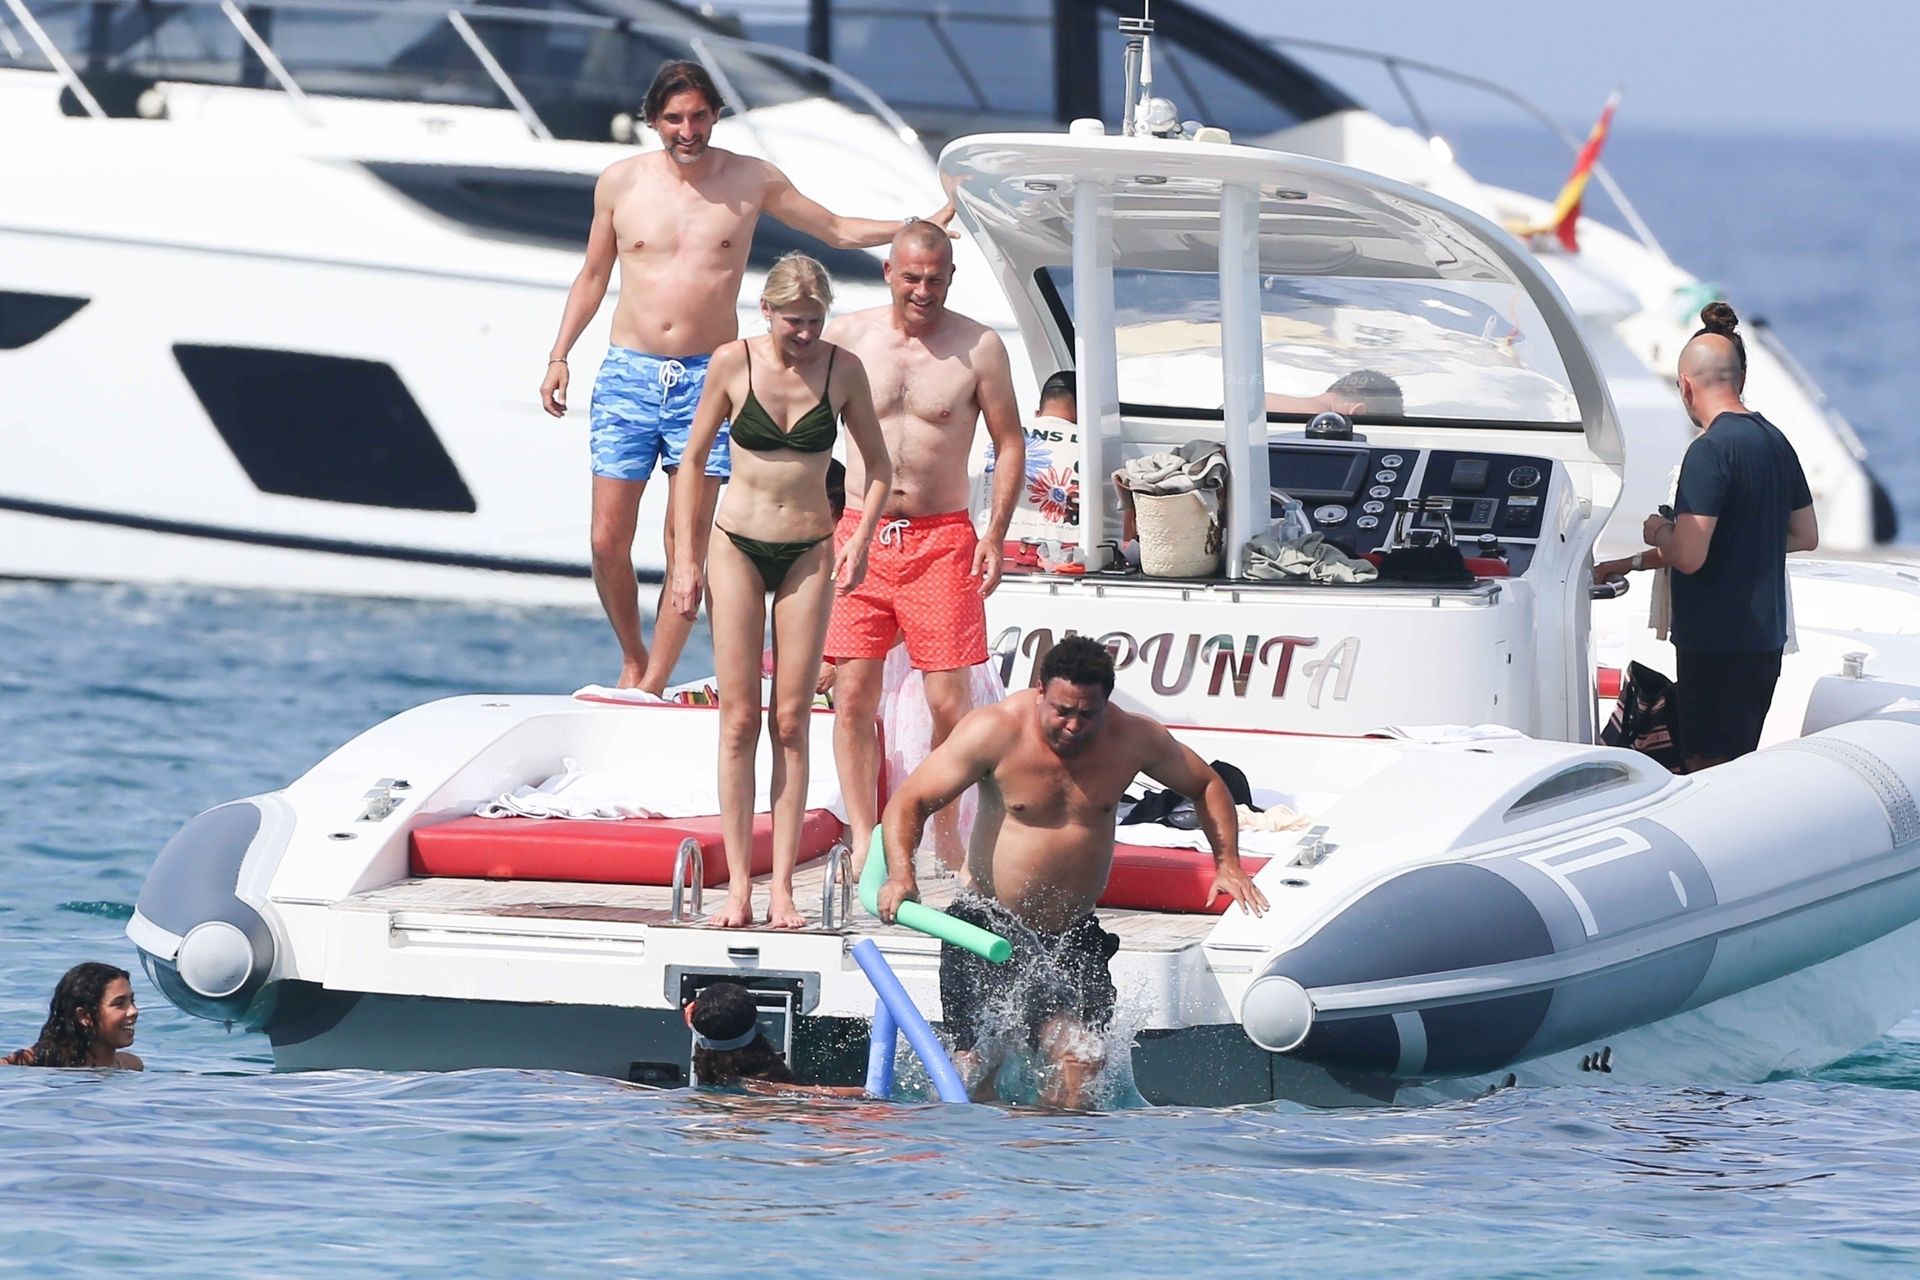 Celina Locks & Ronaldo are Pictured While on Holiday in Formentera (20 Photos)